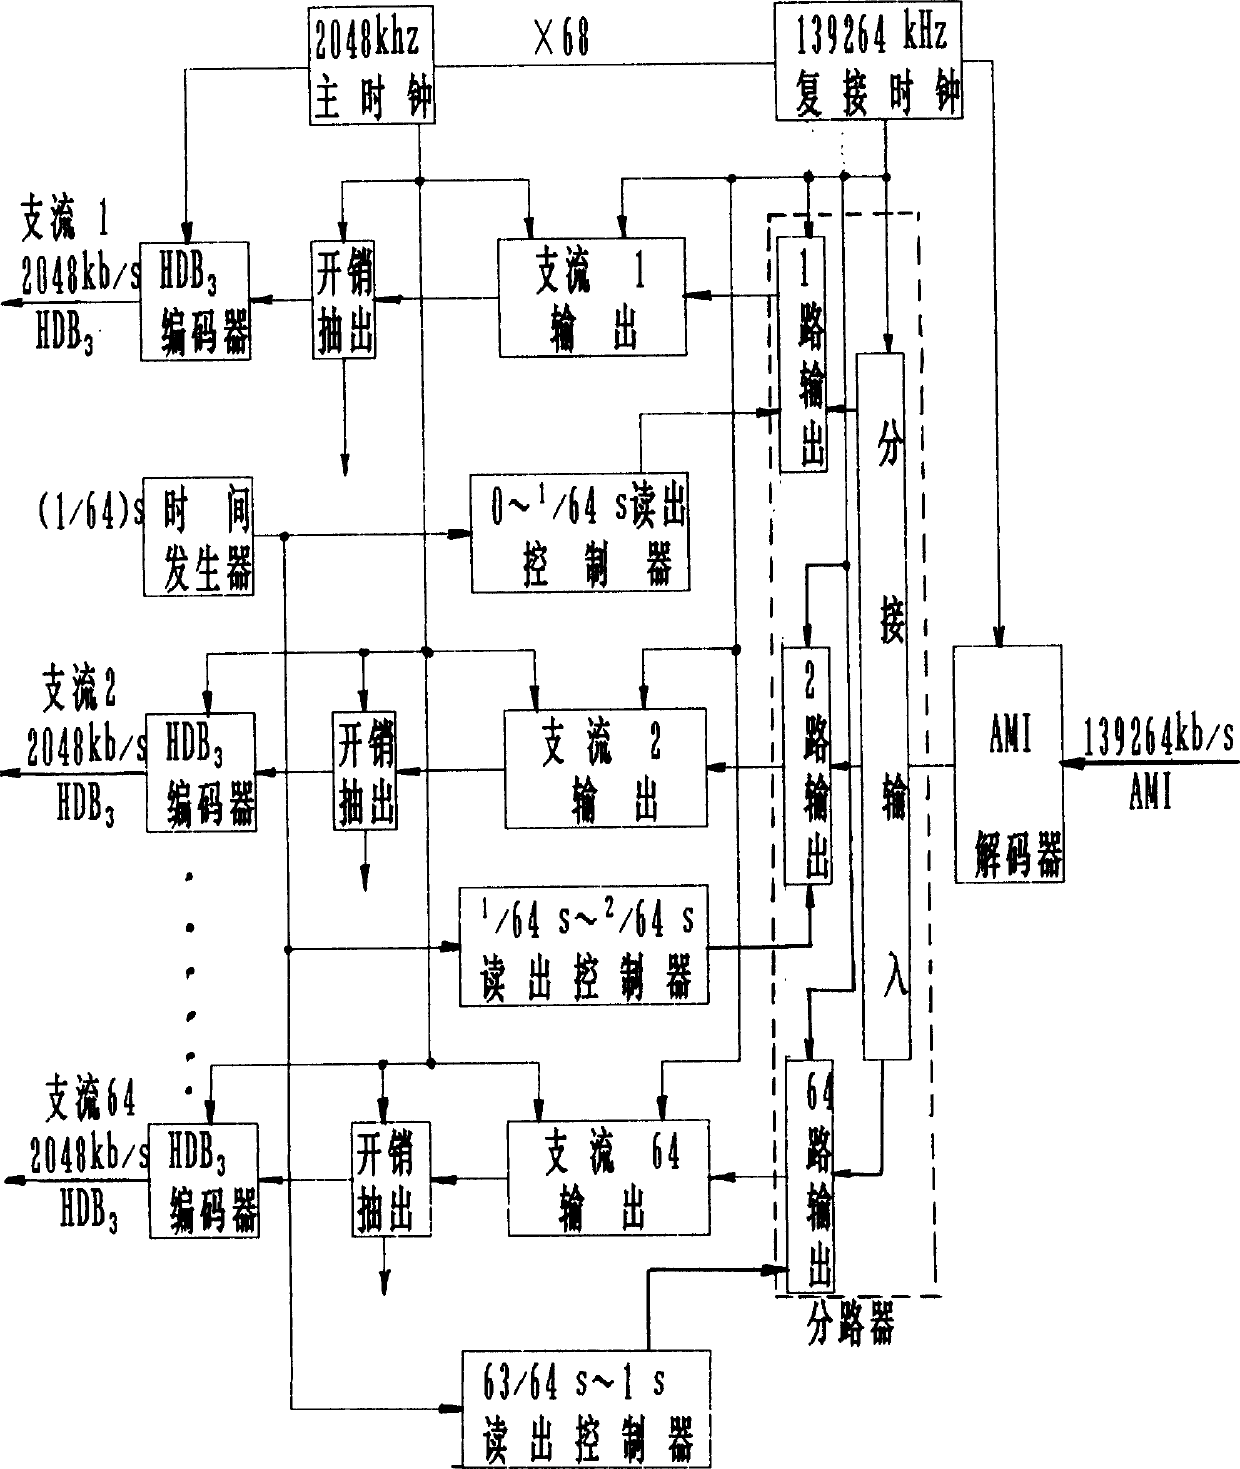 Synchronous digital multiplexer for on-frame multi plexing for multipath communication